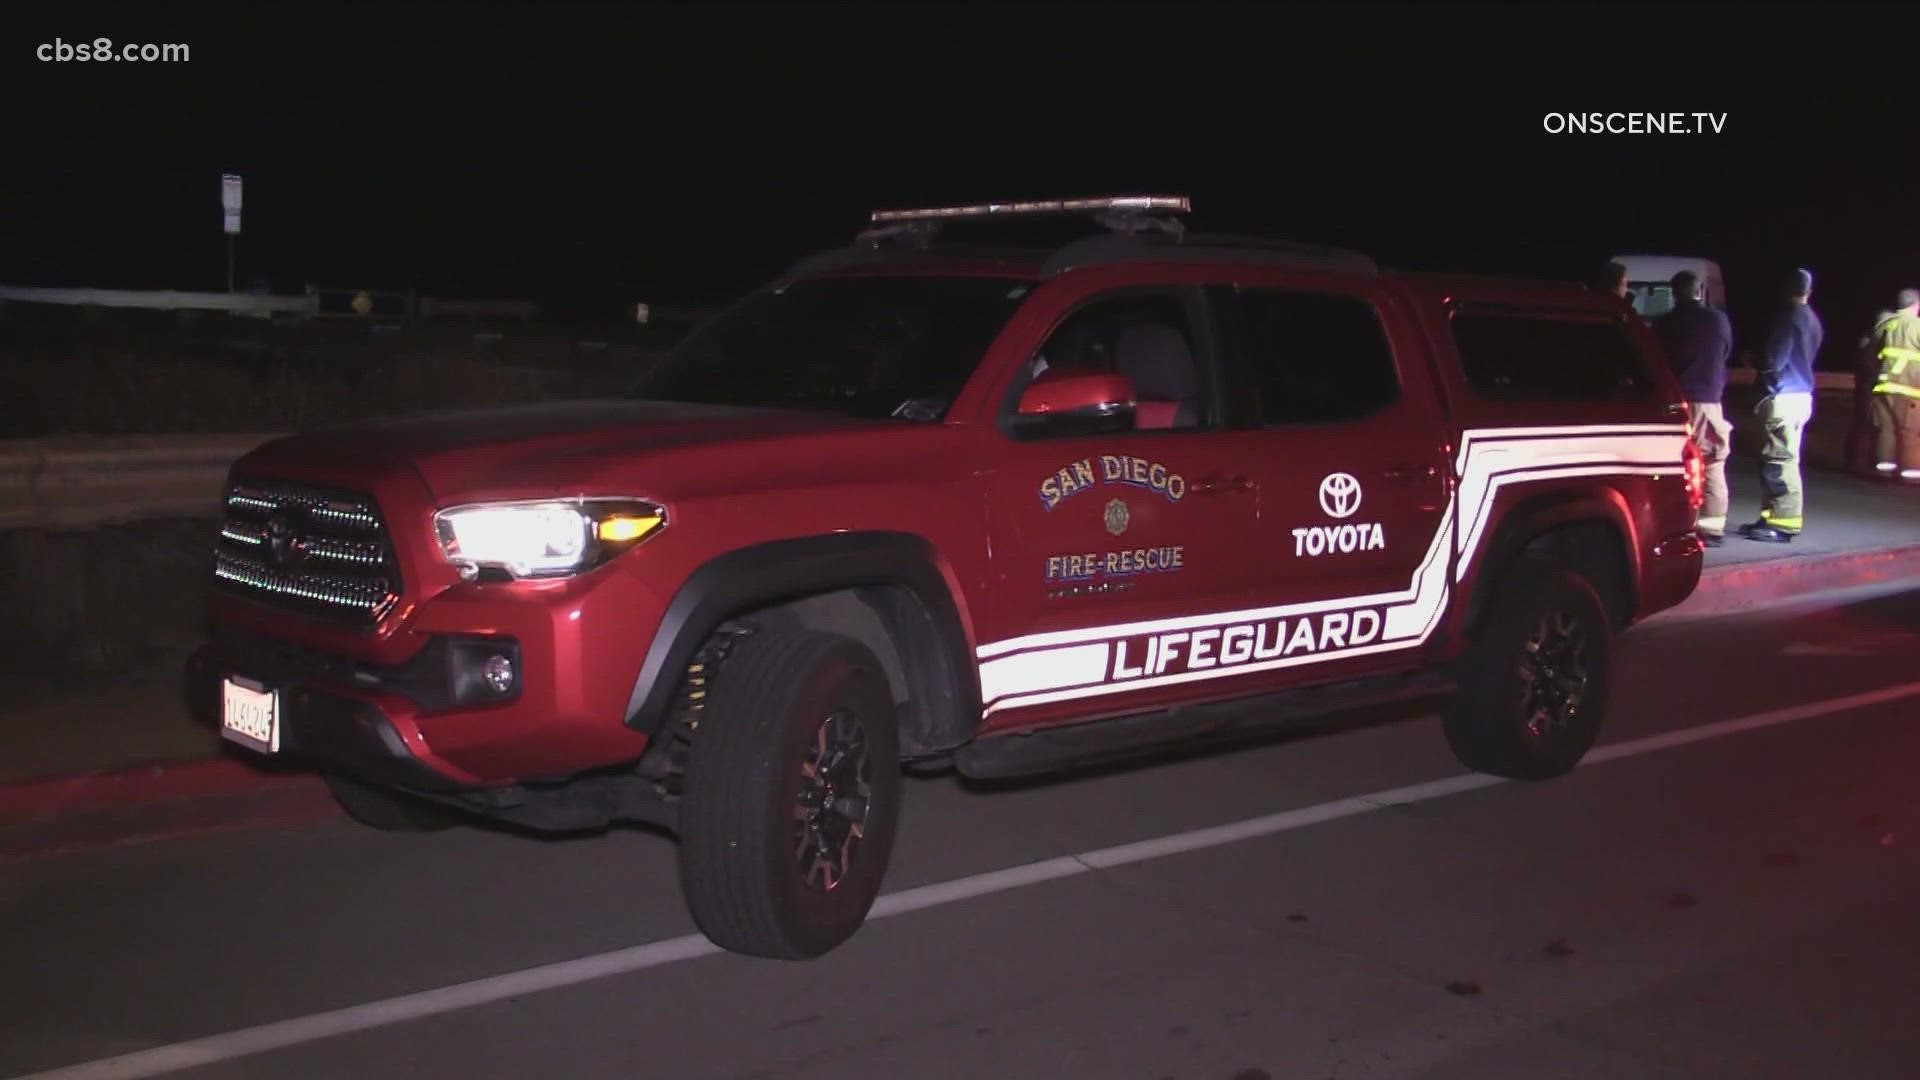 Authorities say someone called 911 shortly before 3 a.m. on Friday because they heard voices screaming from the water.